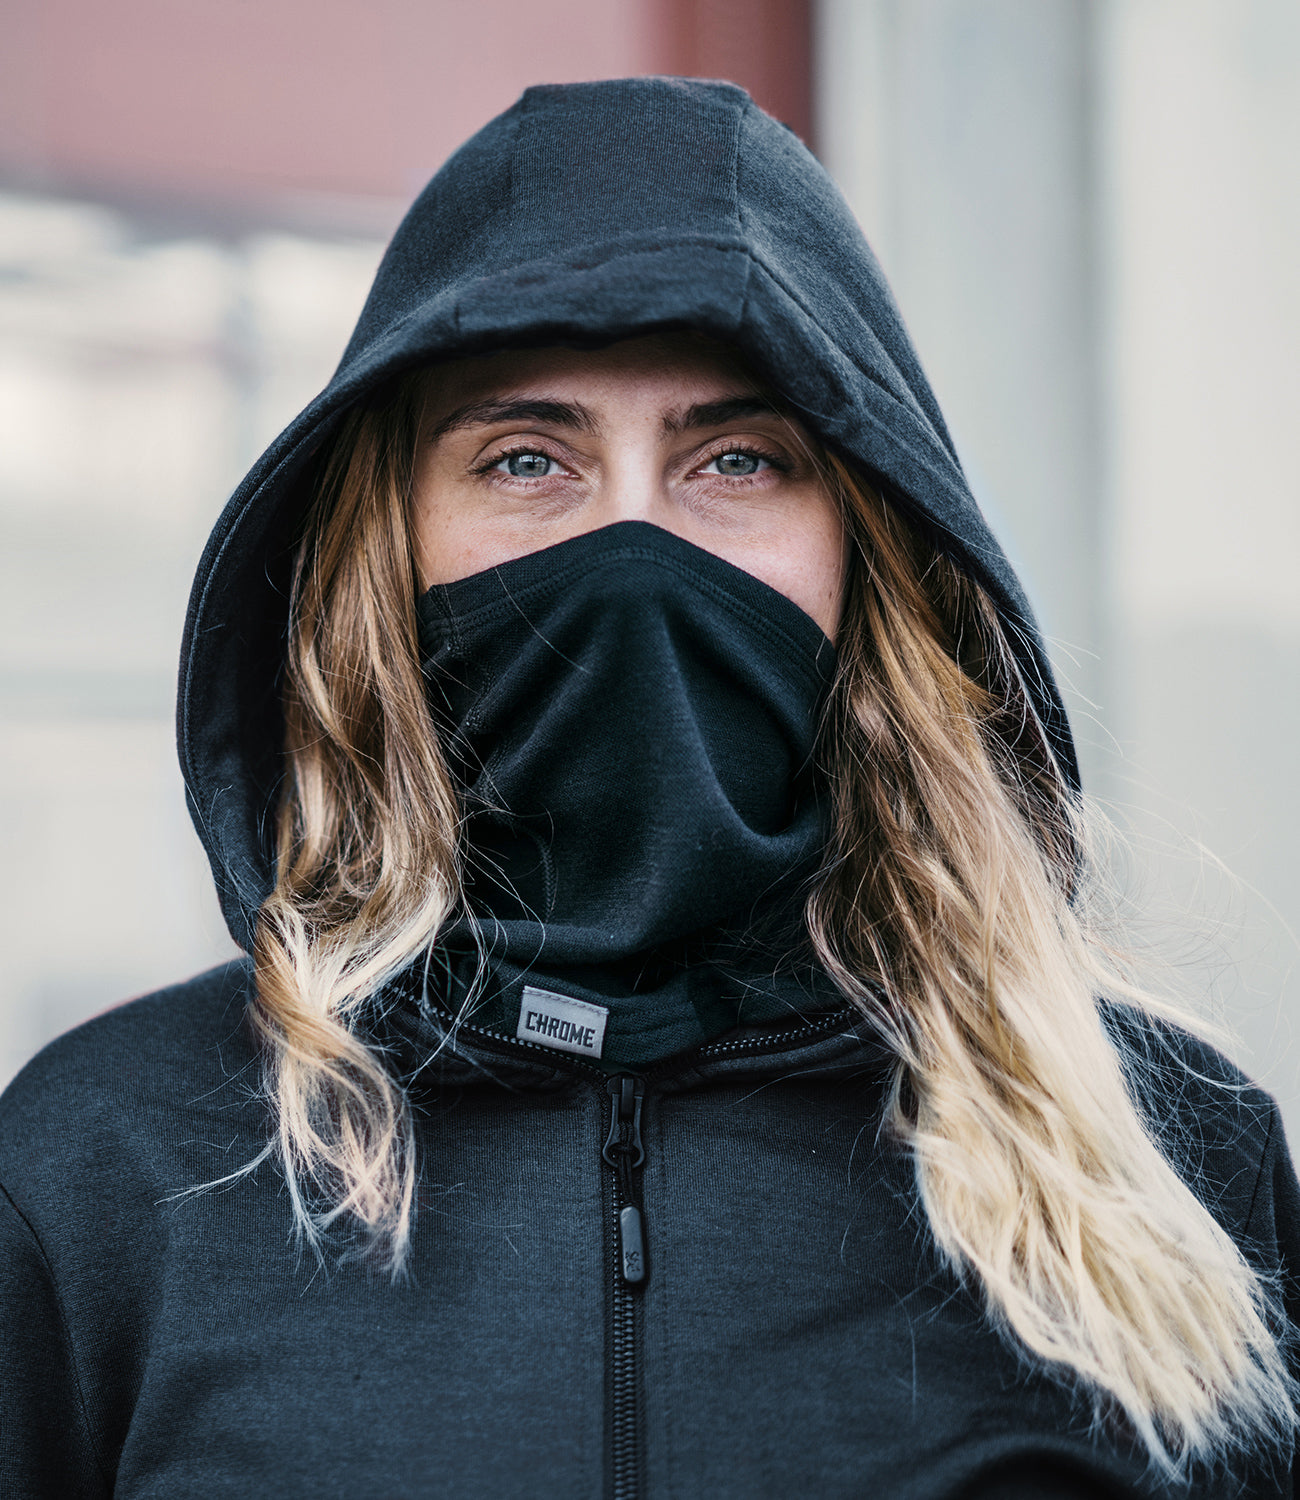 Merino Gaiter worn by a woman with a hoodie on mobile image size